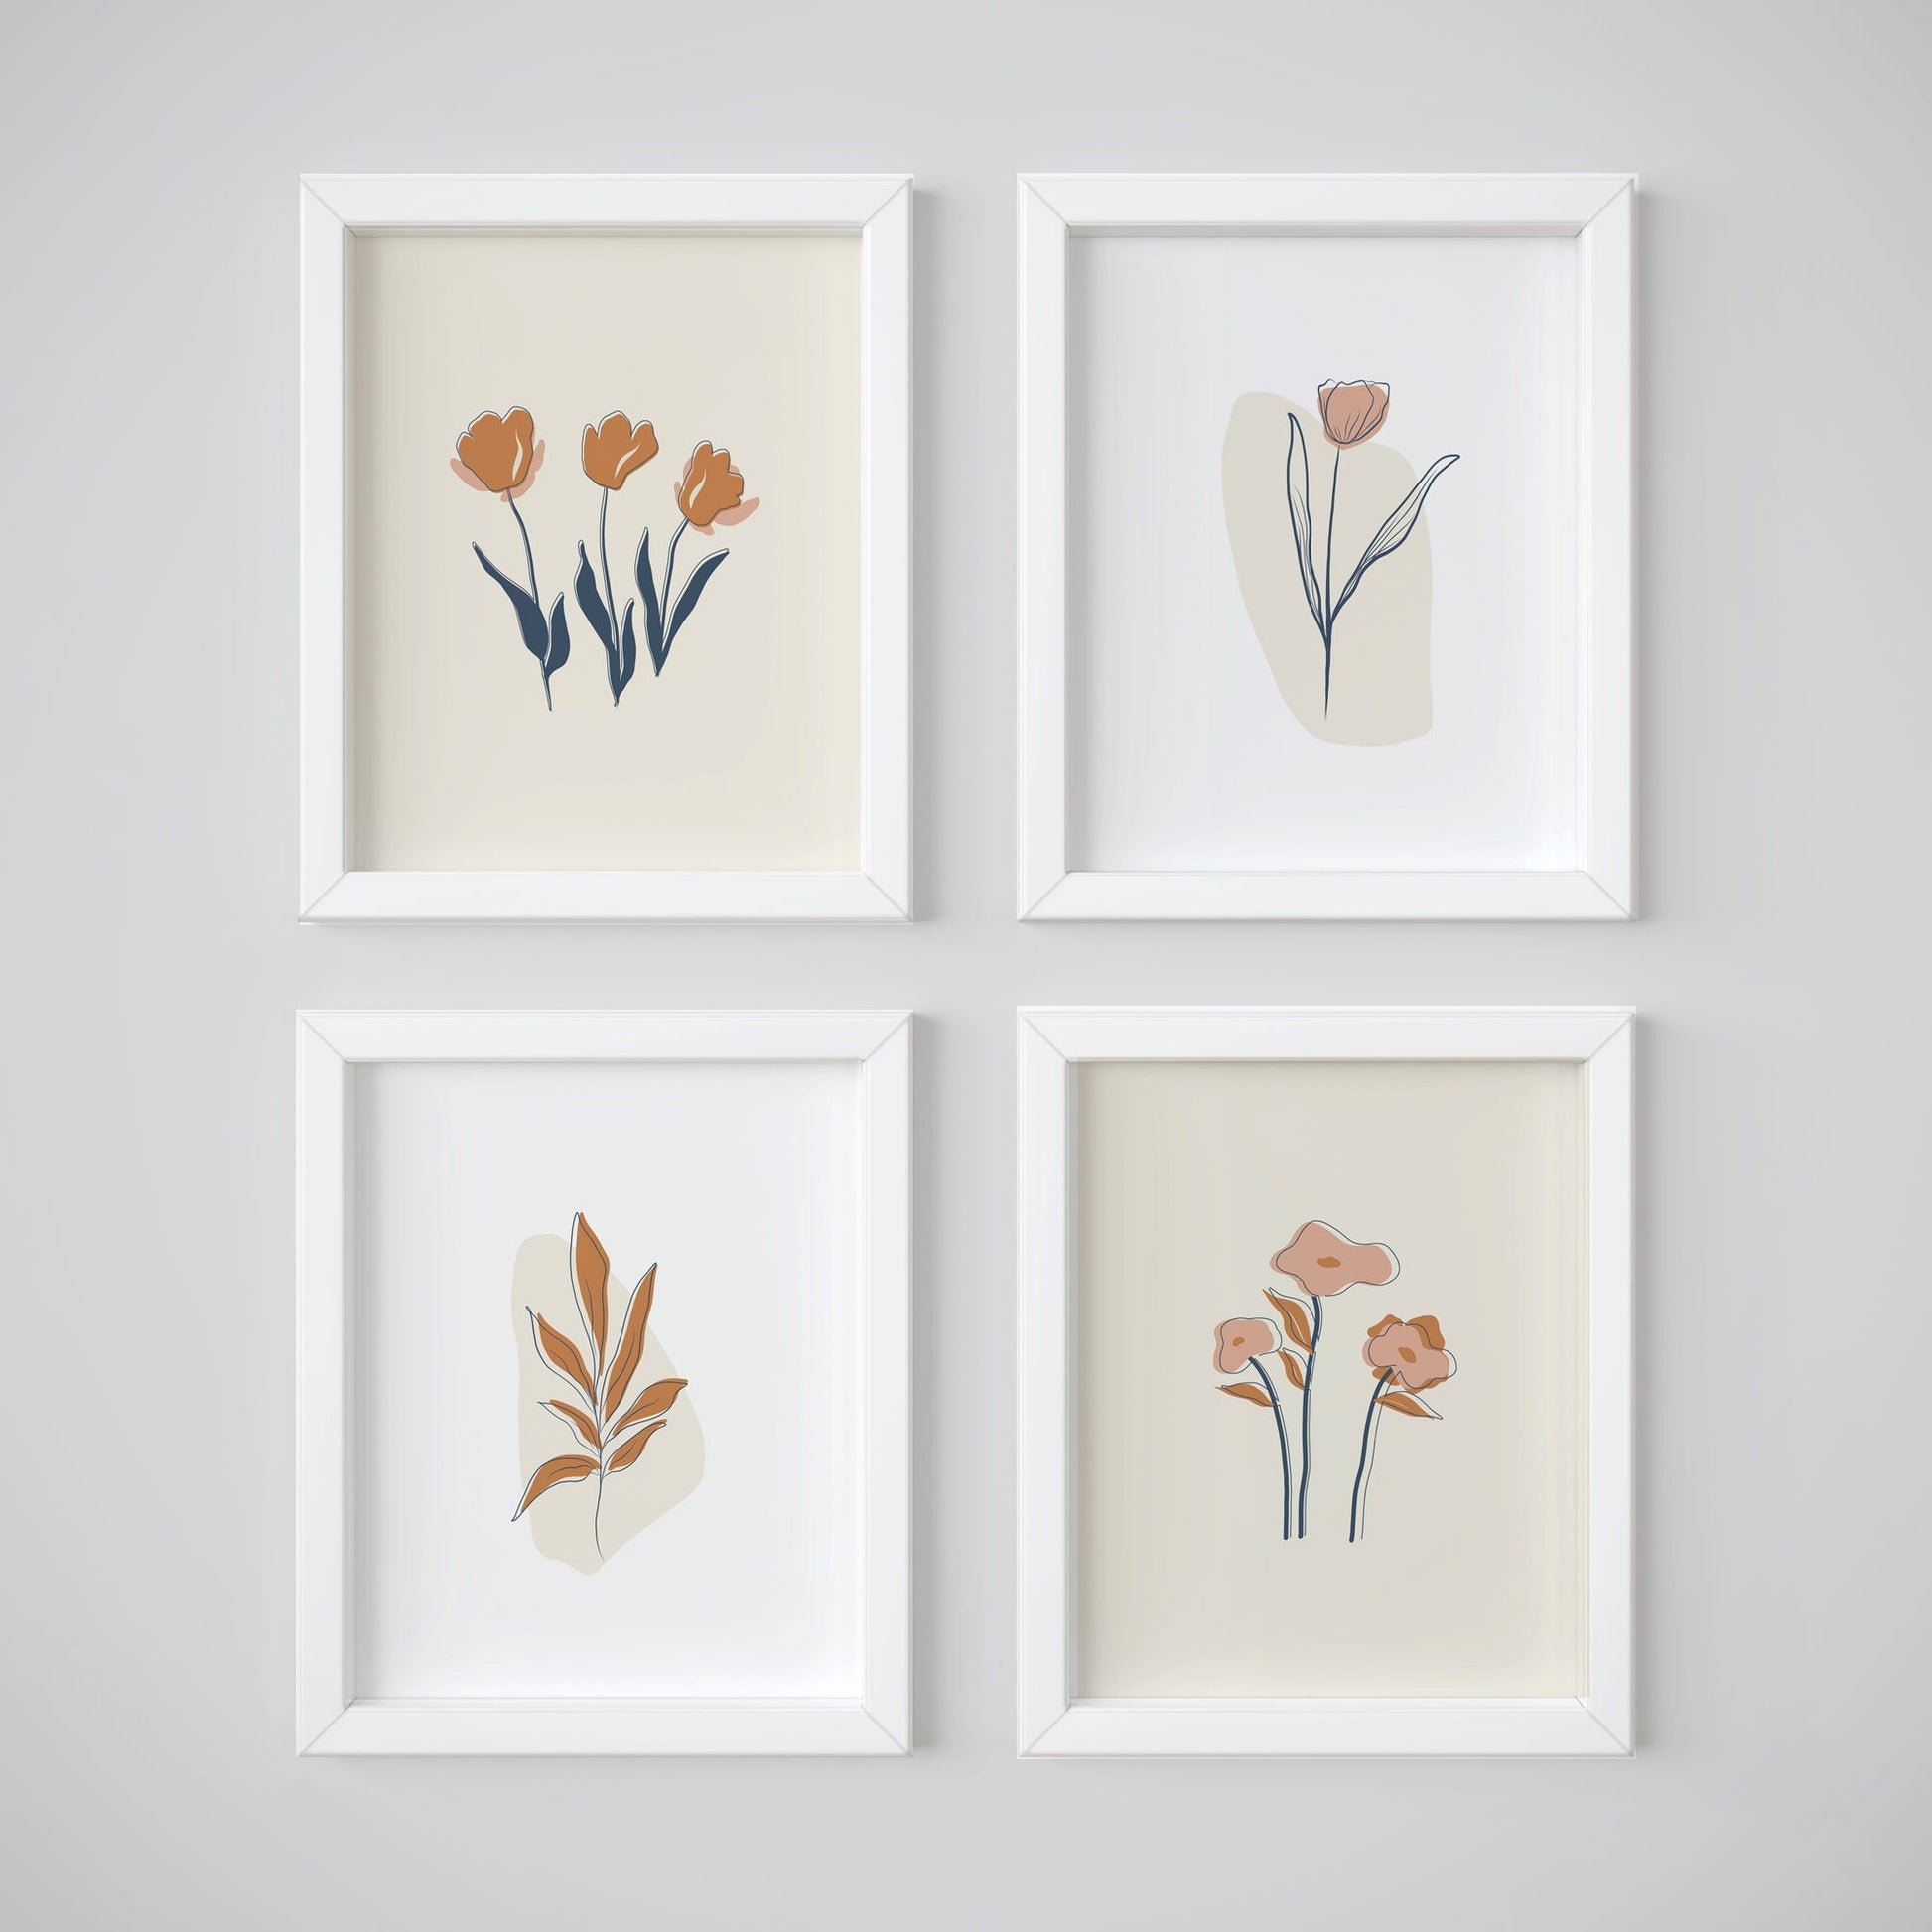 Set of Four Floral Wall Prints - Minimalist Artistic Posters - Boho Neutral Art - Beige and Terracotta - Boho Home Decor - Floral Line Art